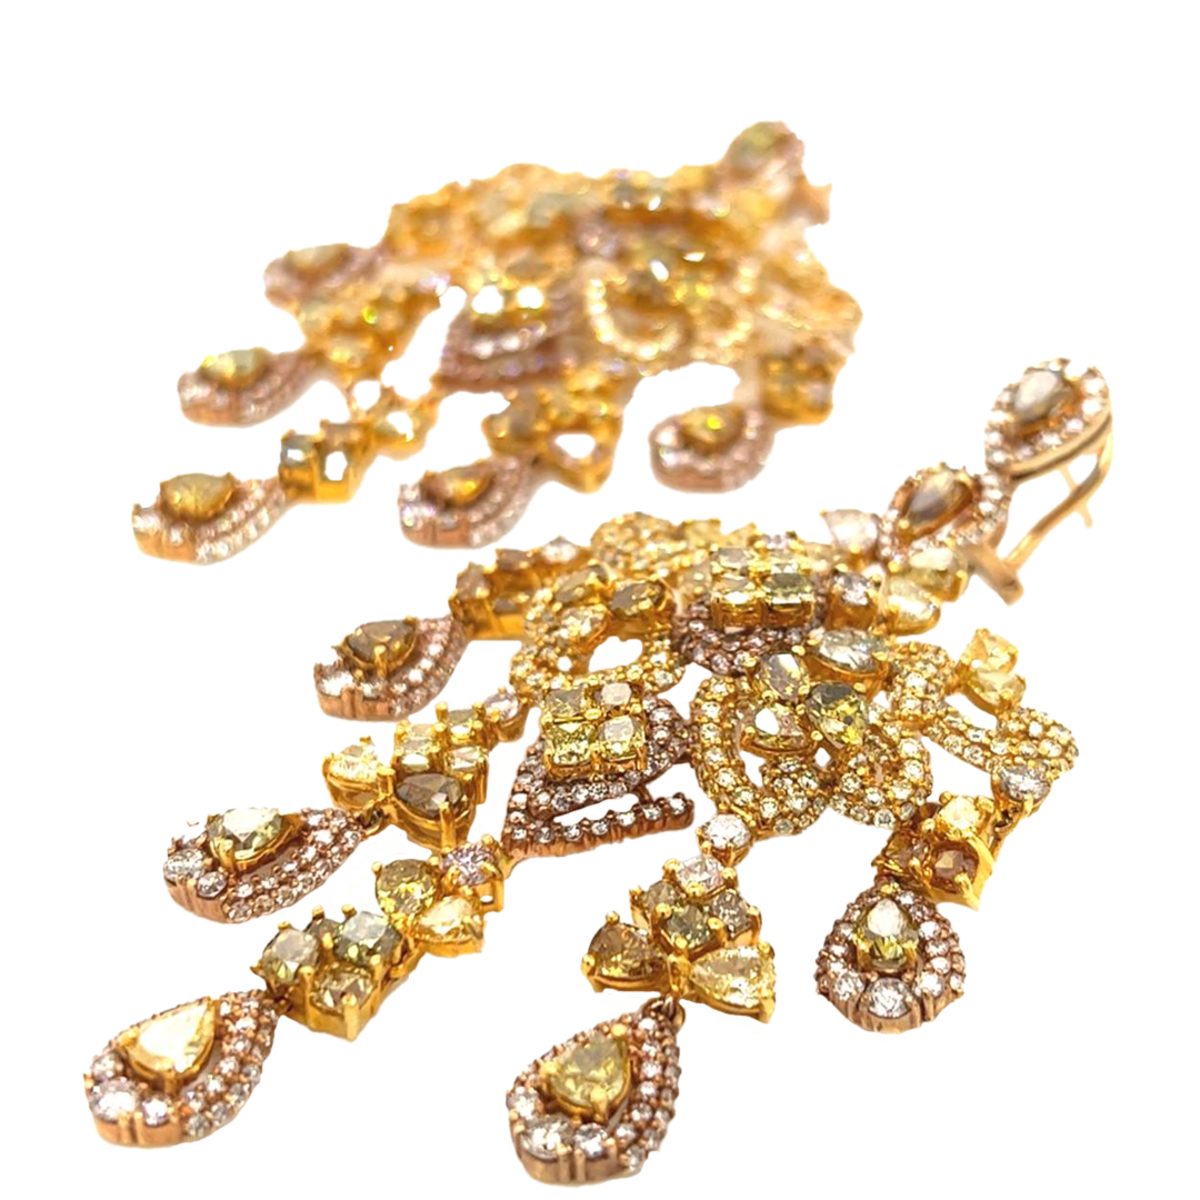 Post-1980s 18KT Yellow Gold Natural Color Diamond Chandelier Earrings front side view